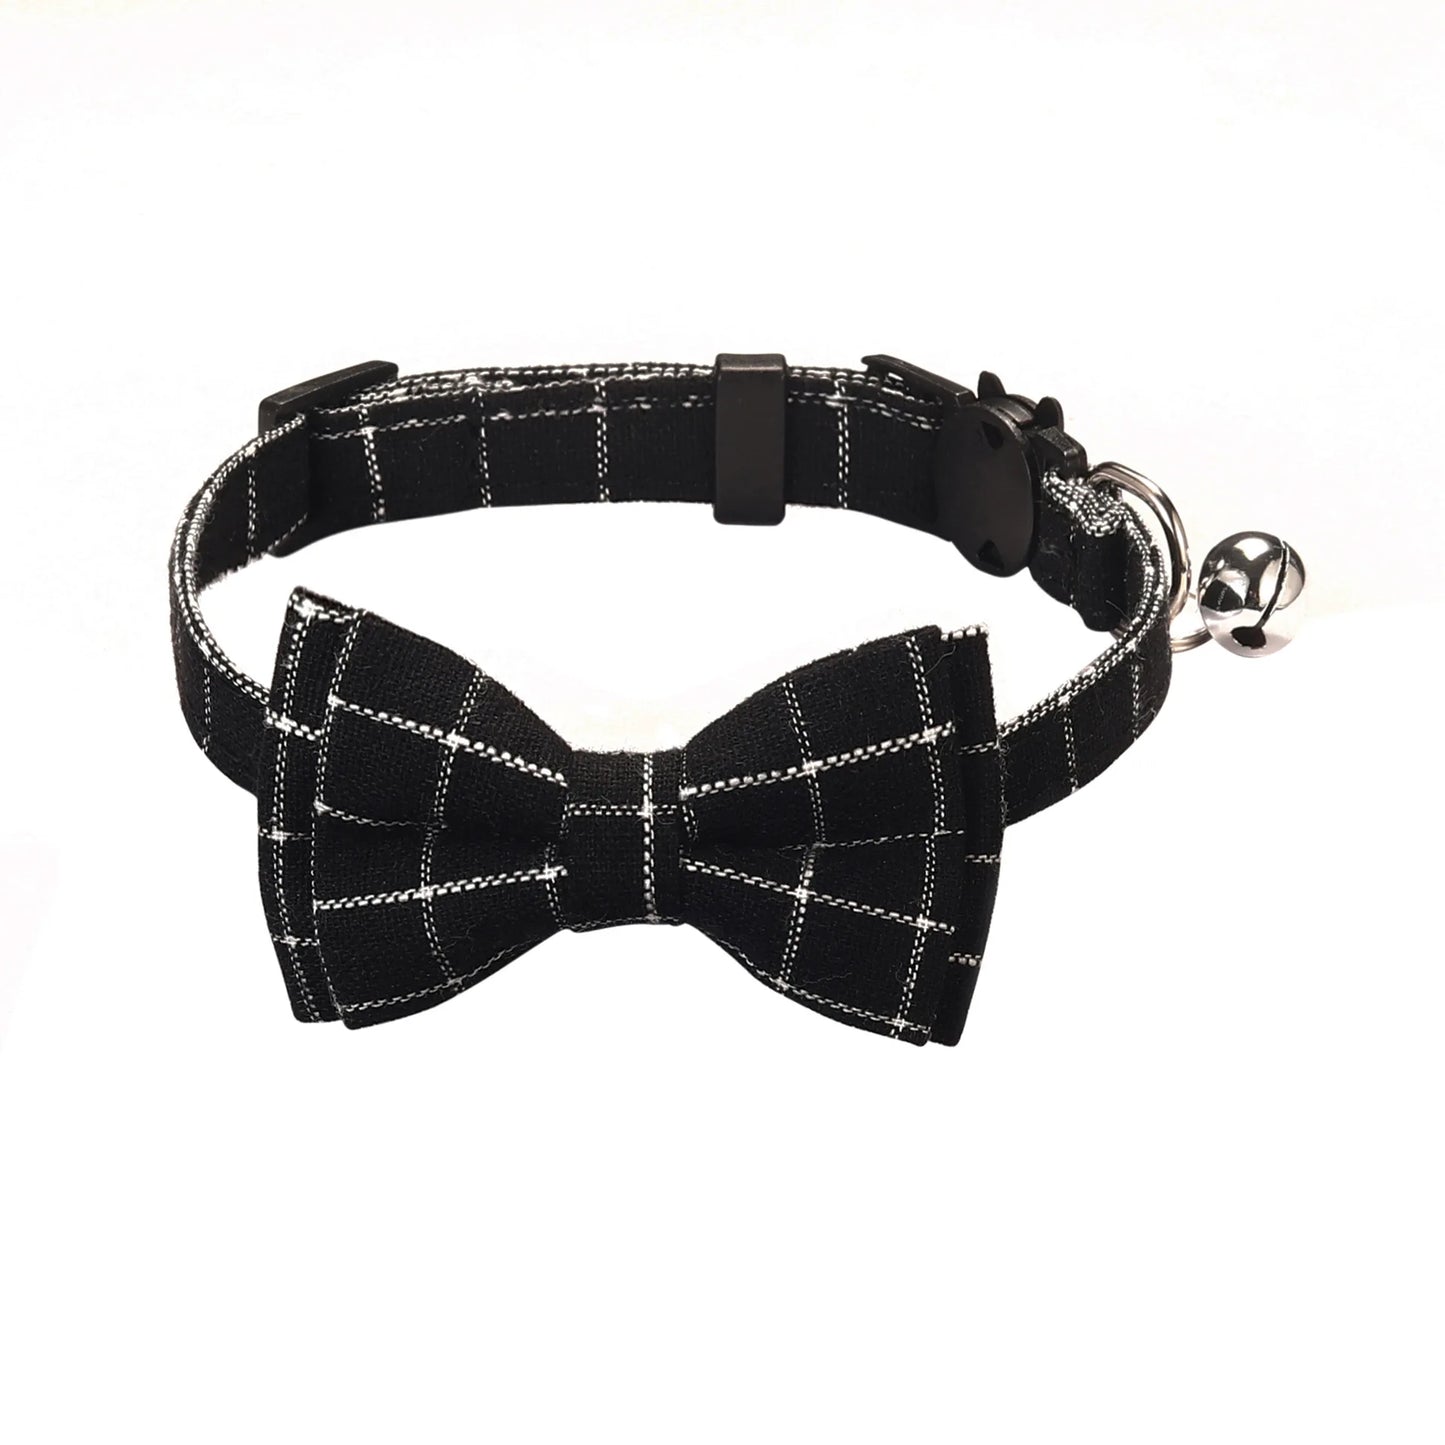 a cute black and white cat bowtie collar with a bell